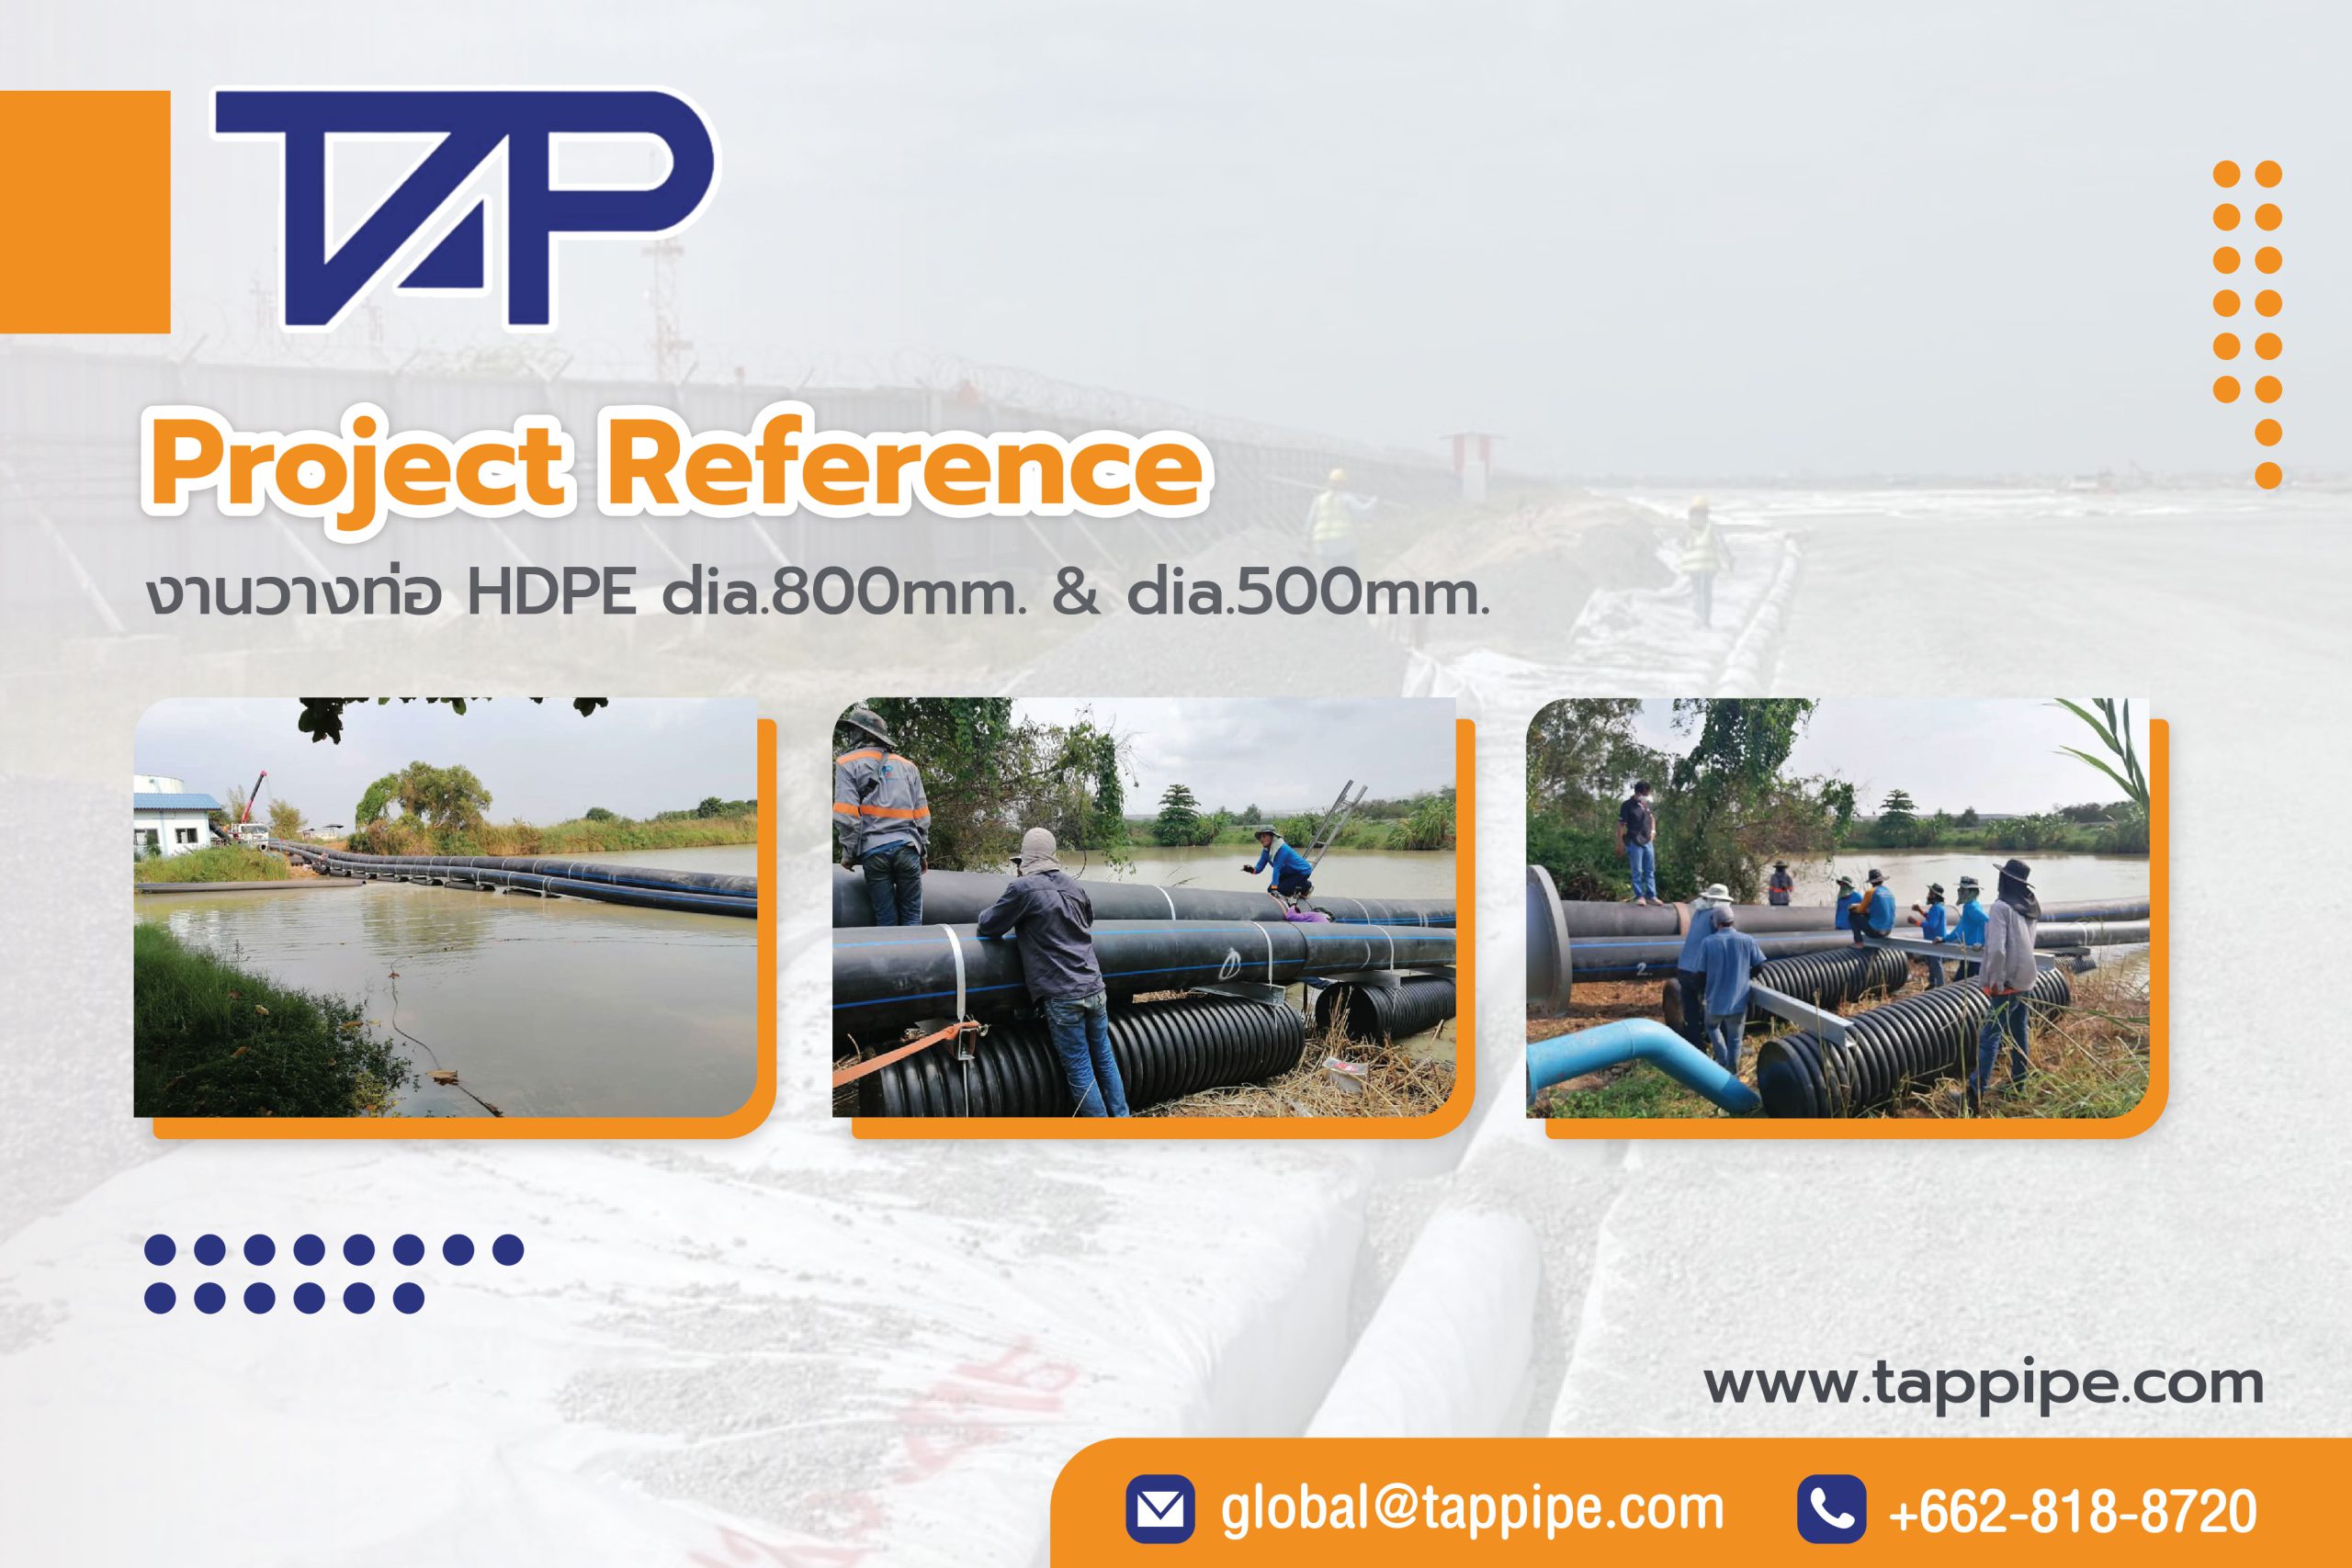 Cover : corrugated pipe ( TAPKORR )s are used to create floats